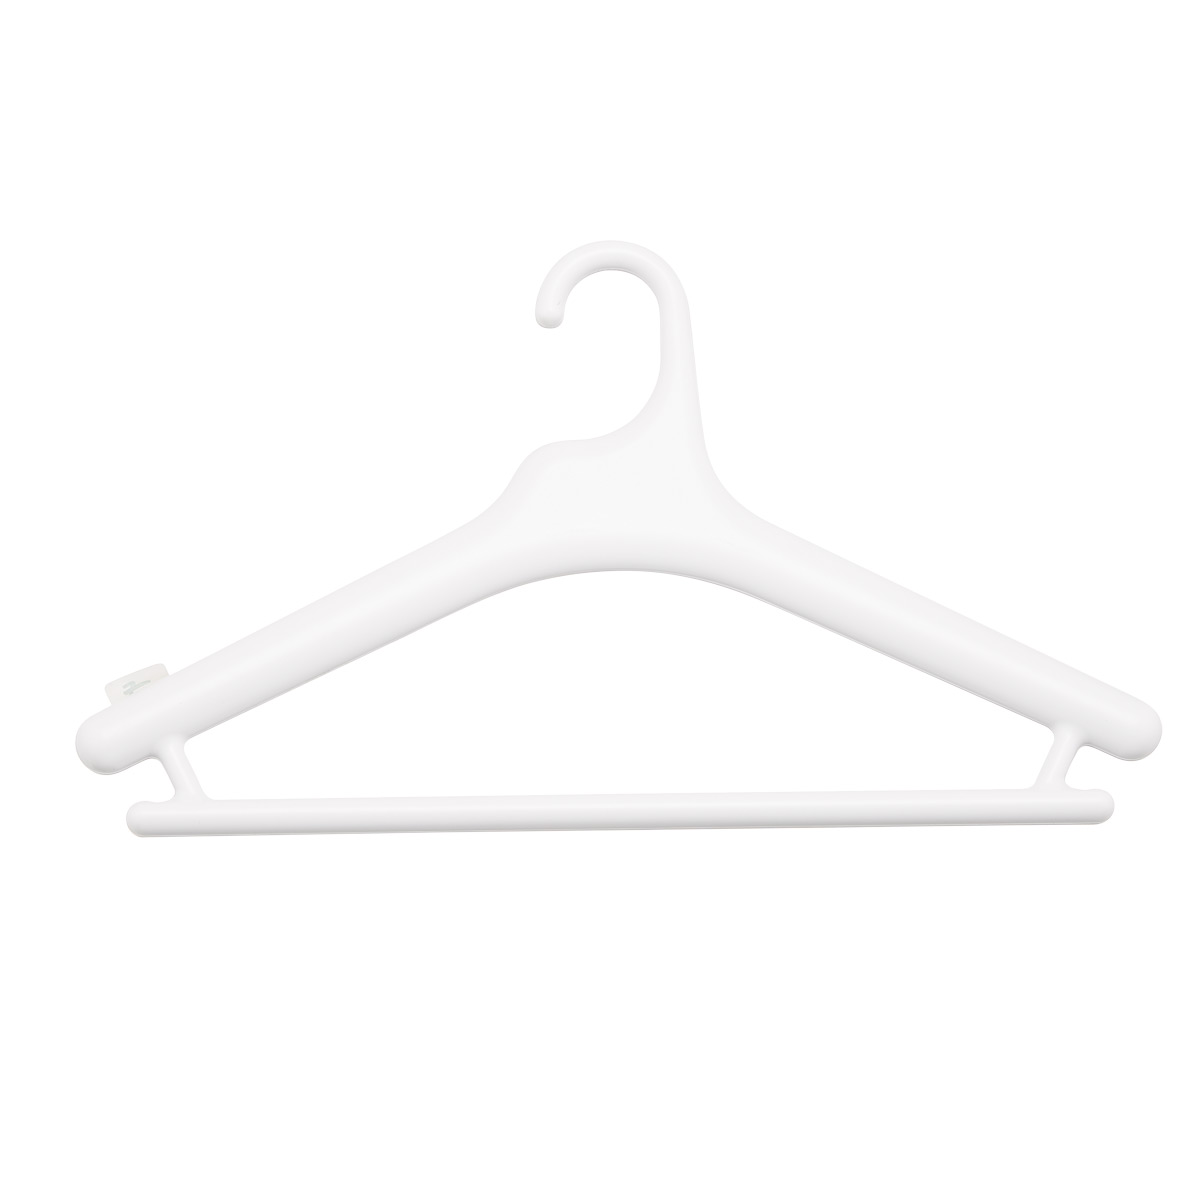 https://www.containerstore.com/catalogimages/392937/10081849-Like-It-non-slip-hangers-wh.jpg